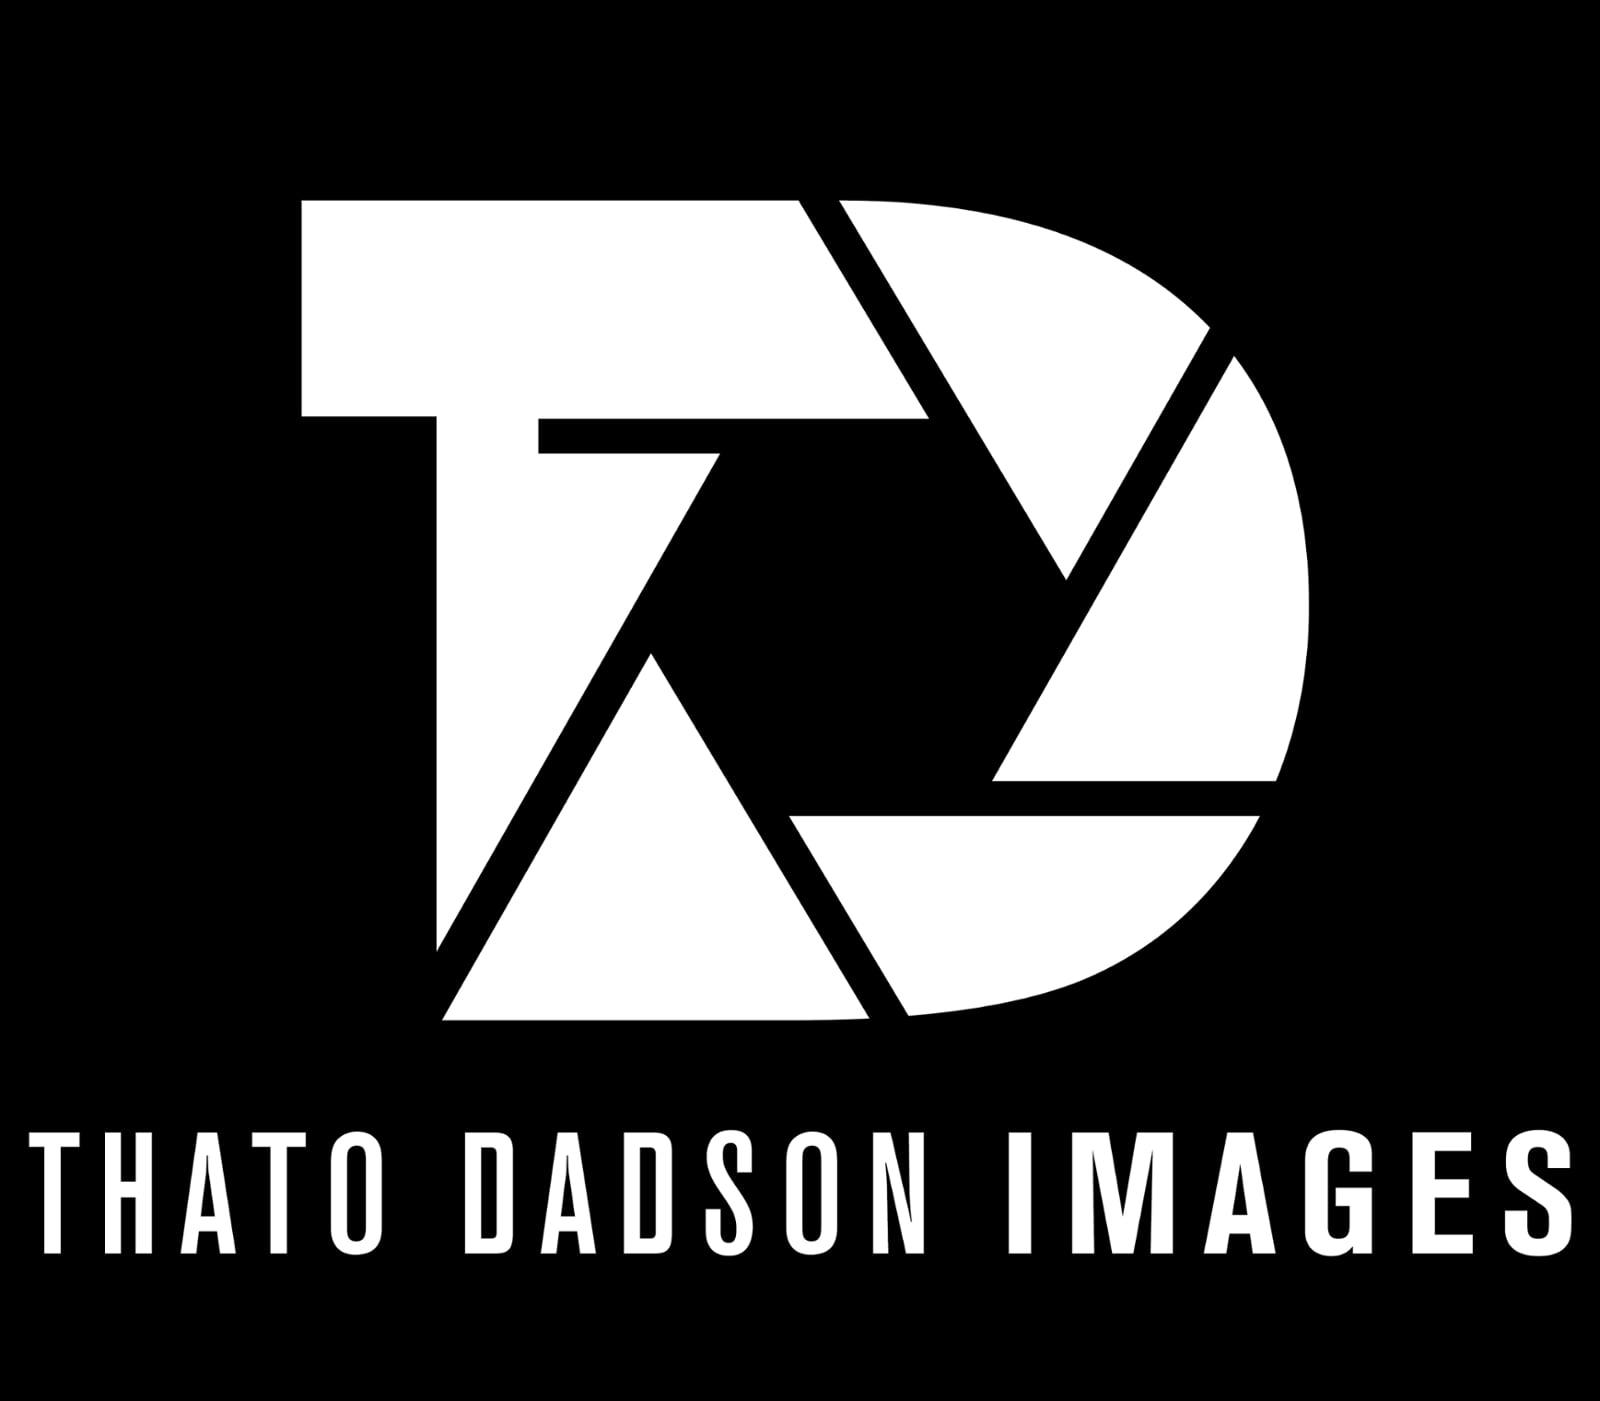 Welcome To Thato Dadson Images